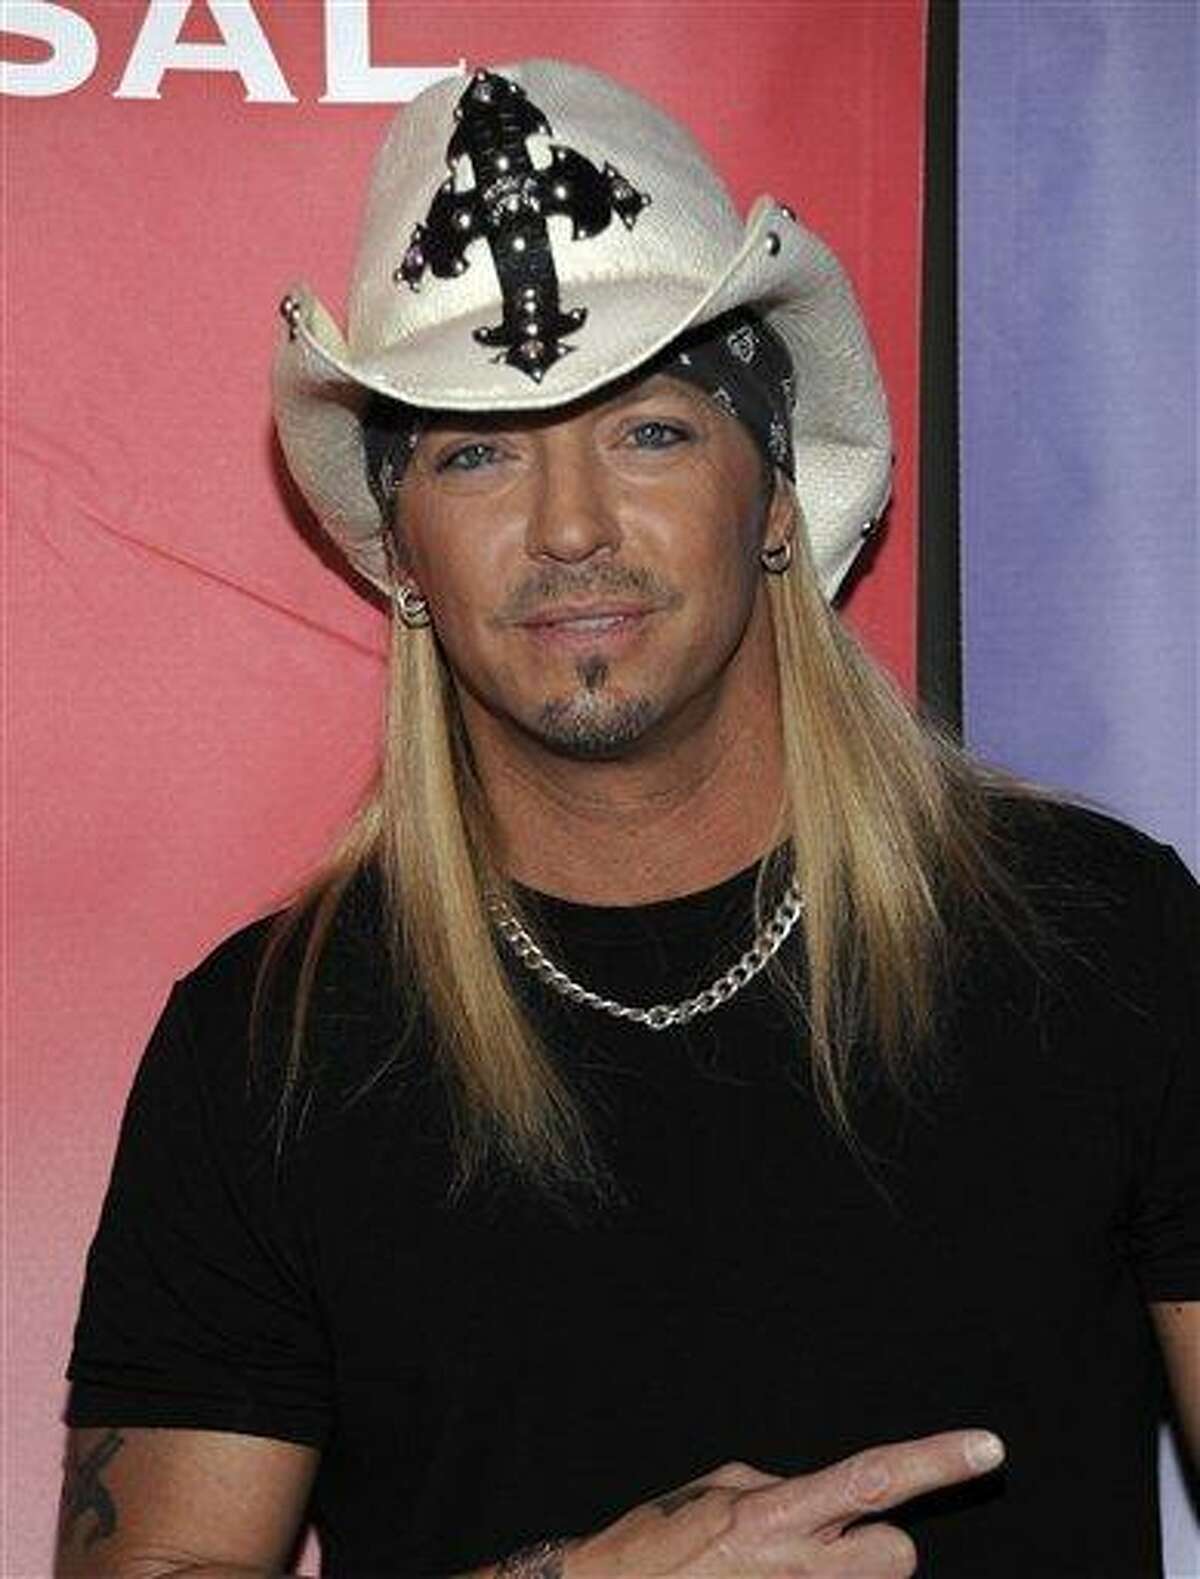 Bret Michaels hospitalized with hemorrhage